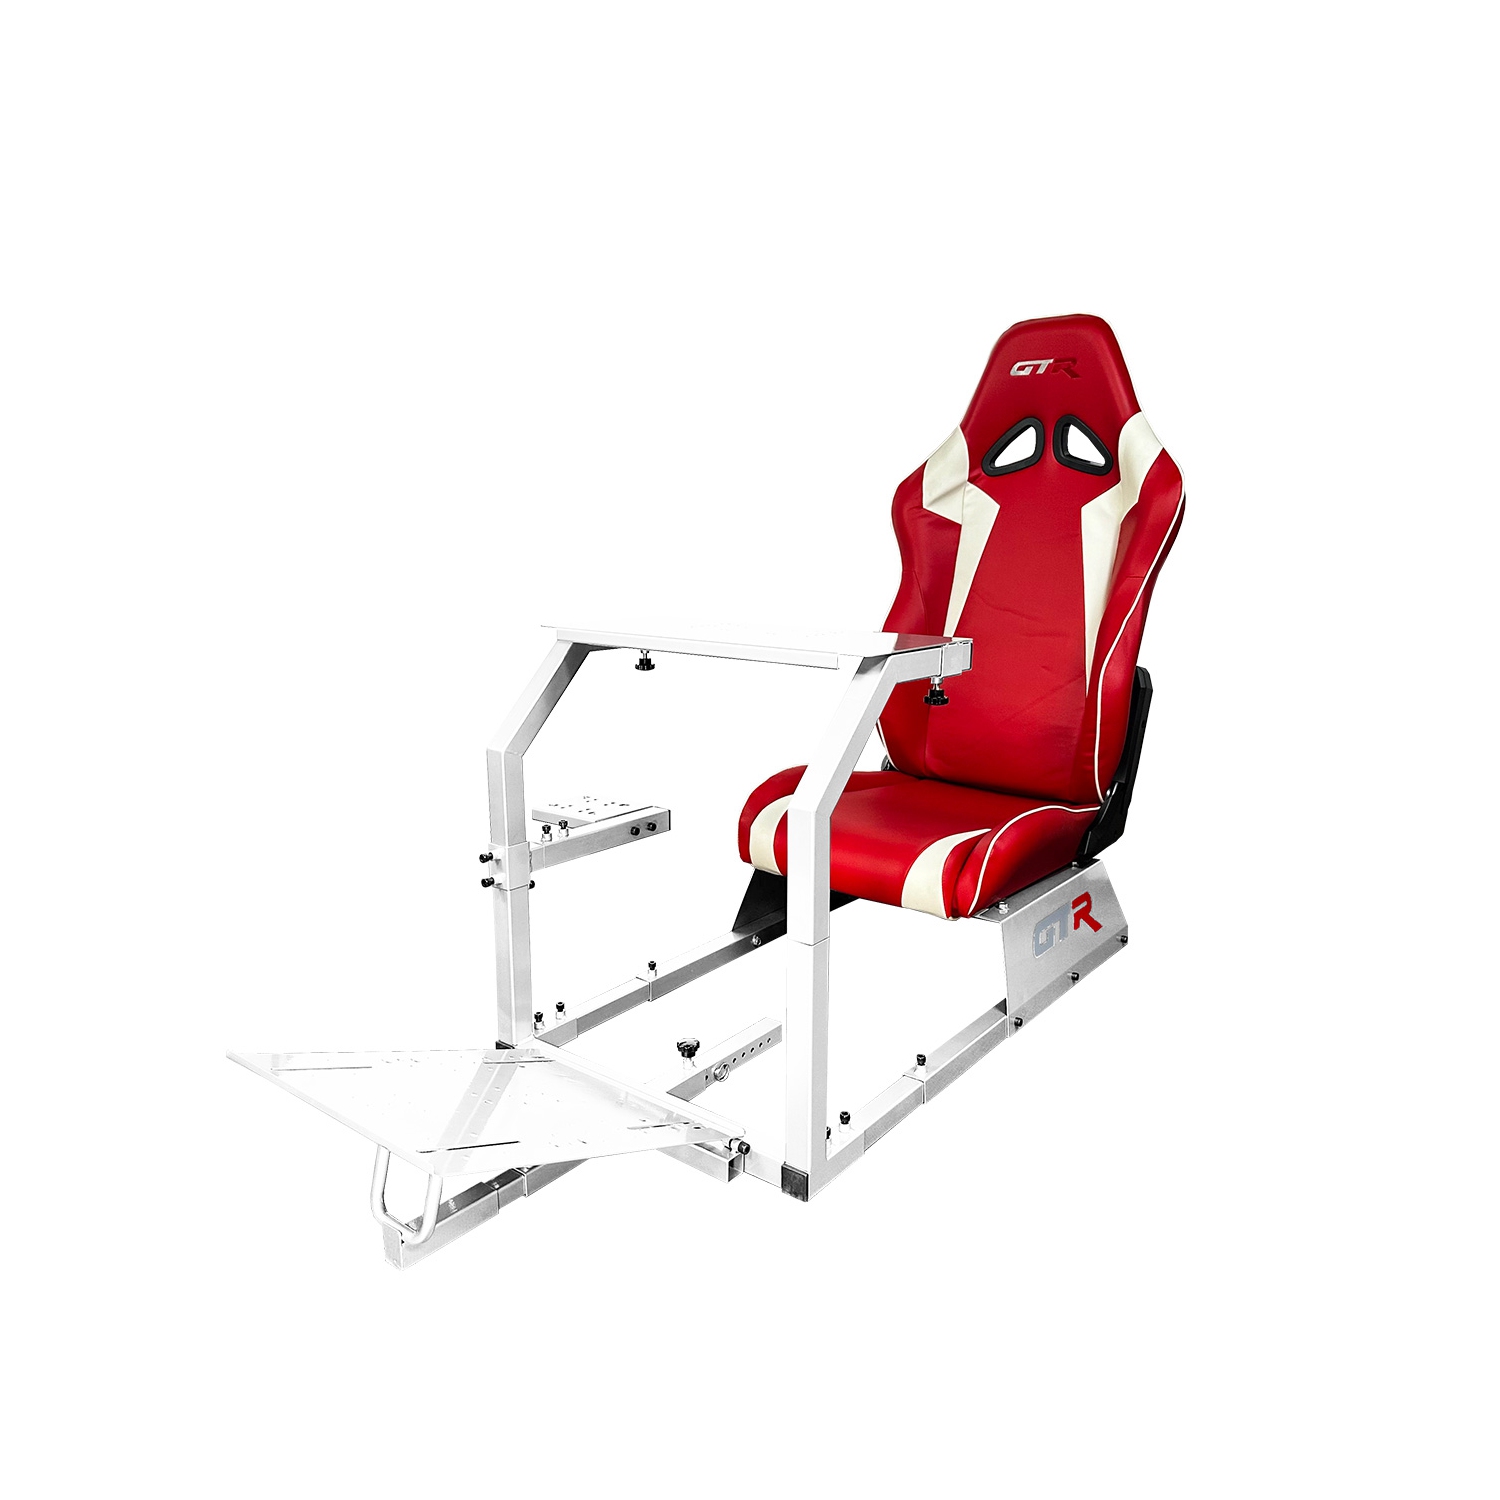 GTR Simulator GTA Model White Frame with Red/White Real Racing Seat